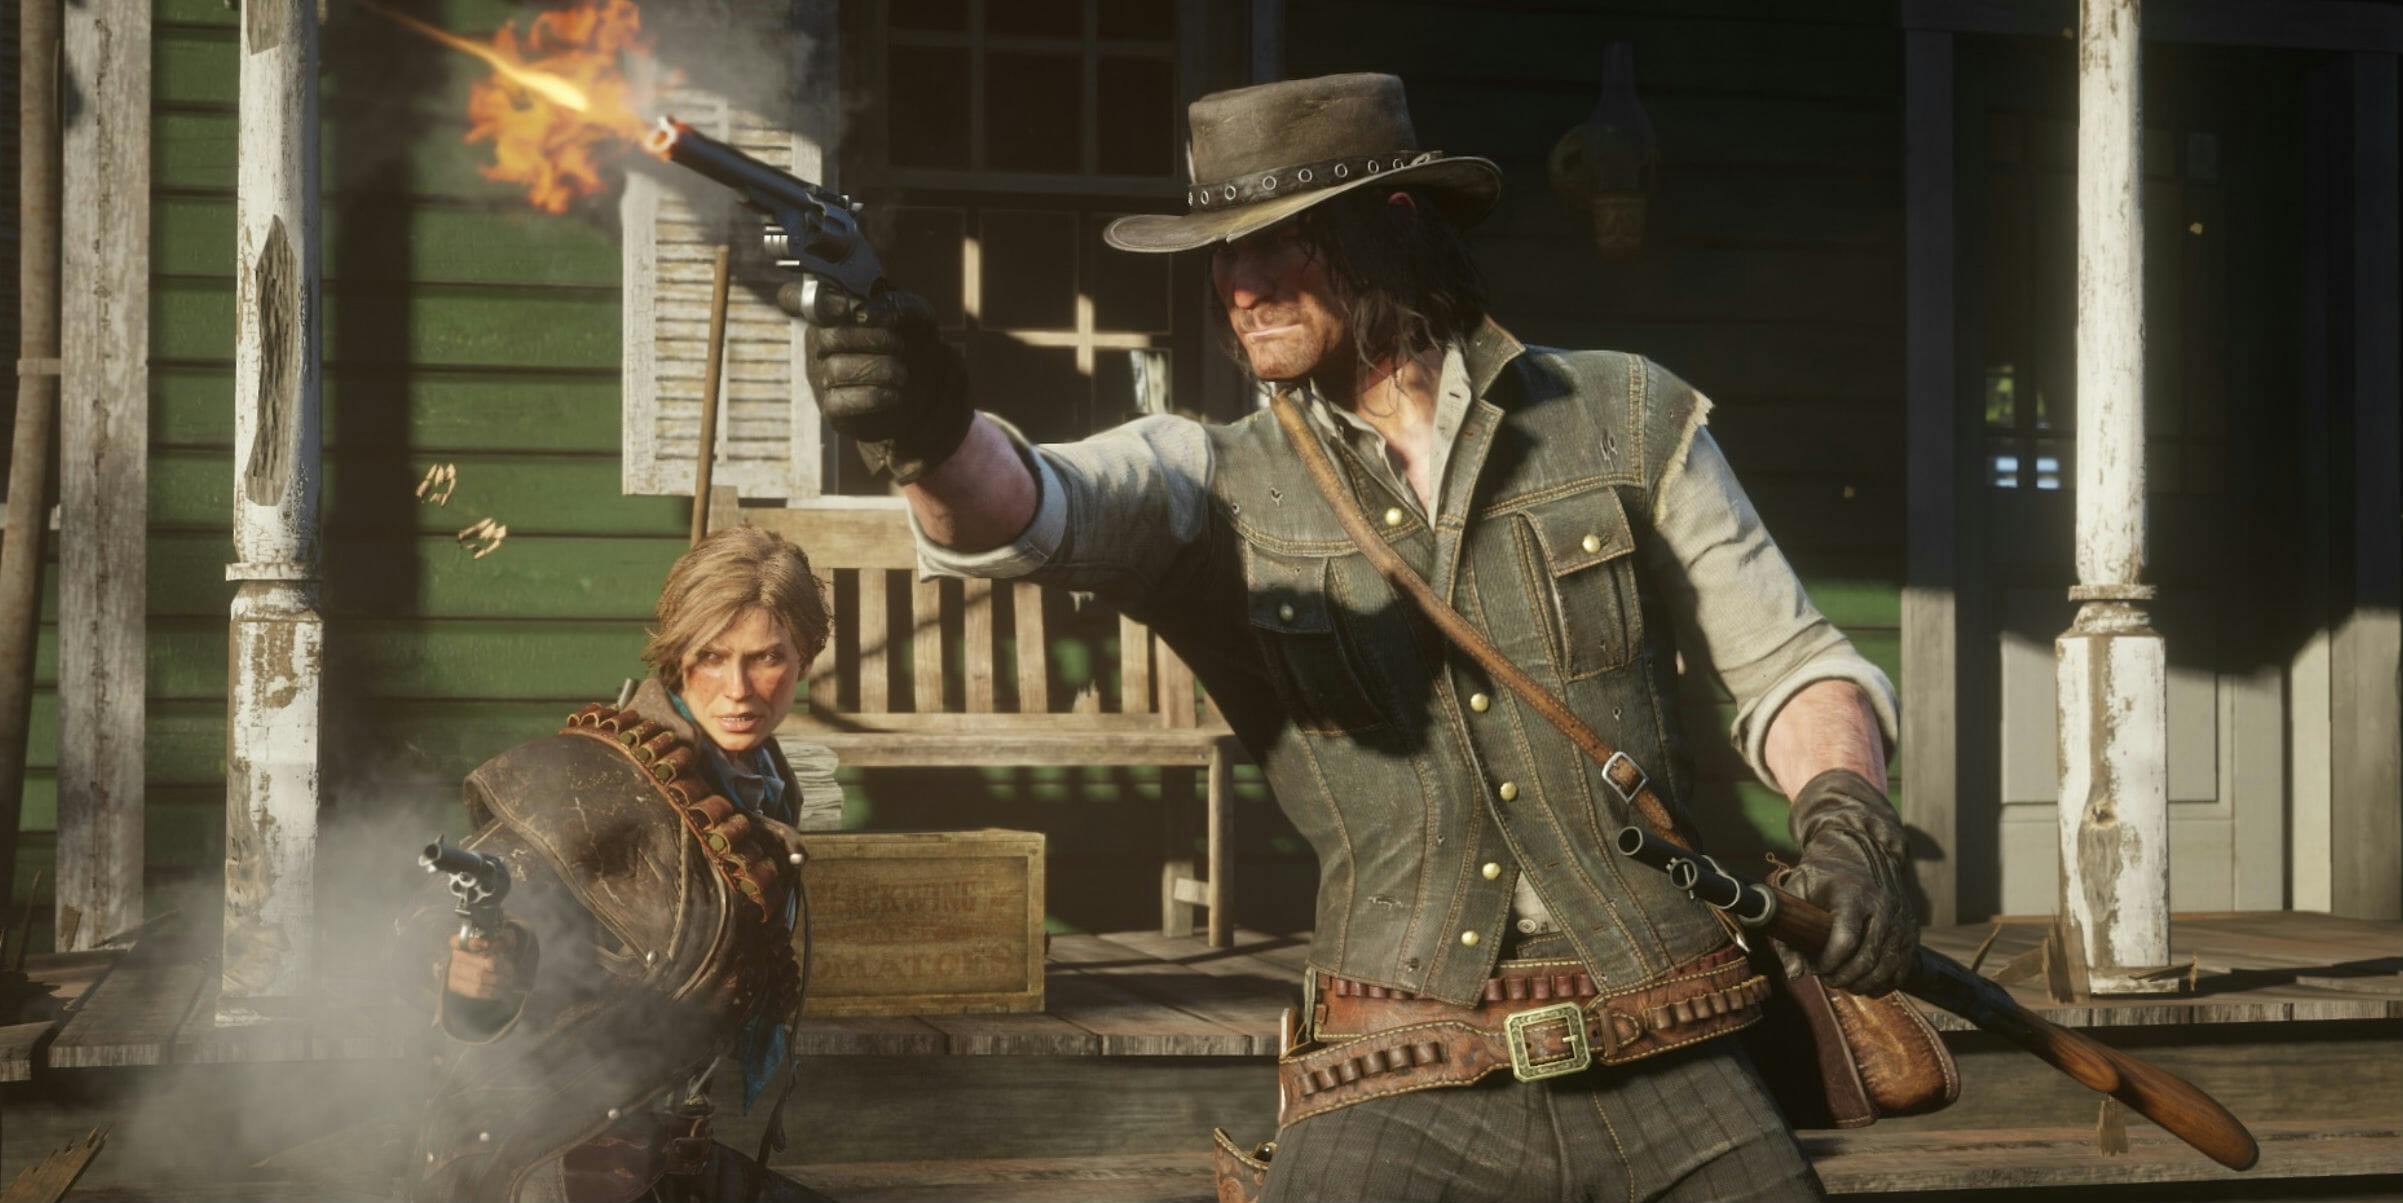 Red Dead Redemption 2 Brings the Wild West to Life with Beauty